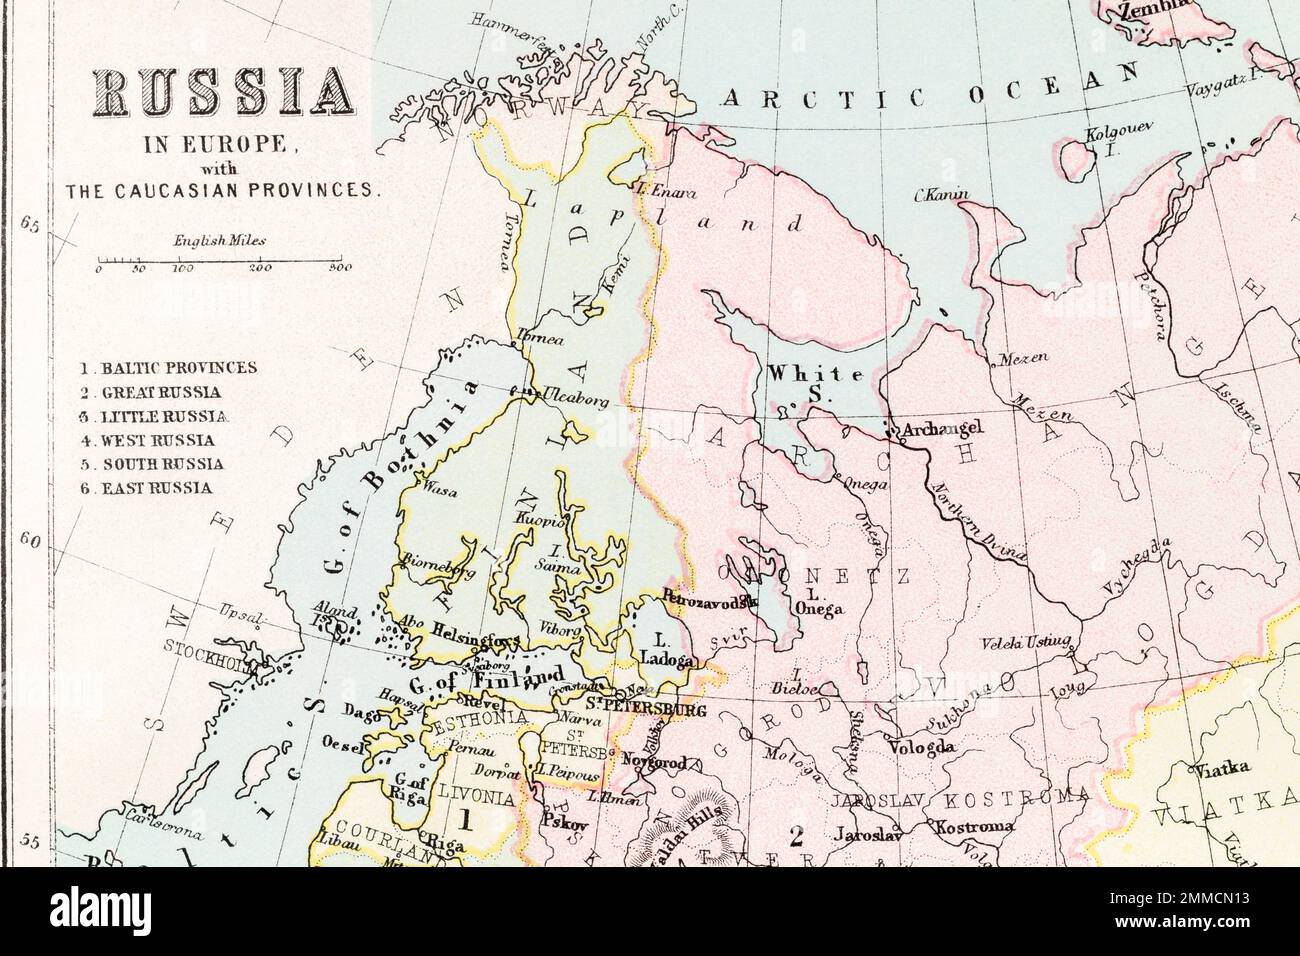 1870 Atlas map of Finland and surrounding Baltic states. For Finland territory changes, Finland borders, Russia-Finland relations & hostility. Stock Photo